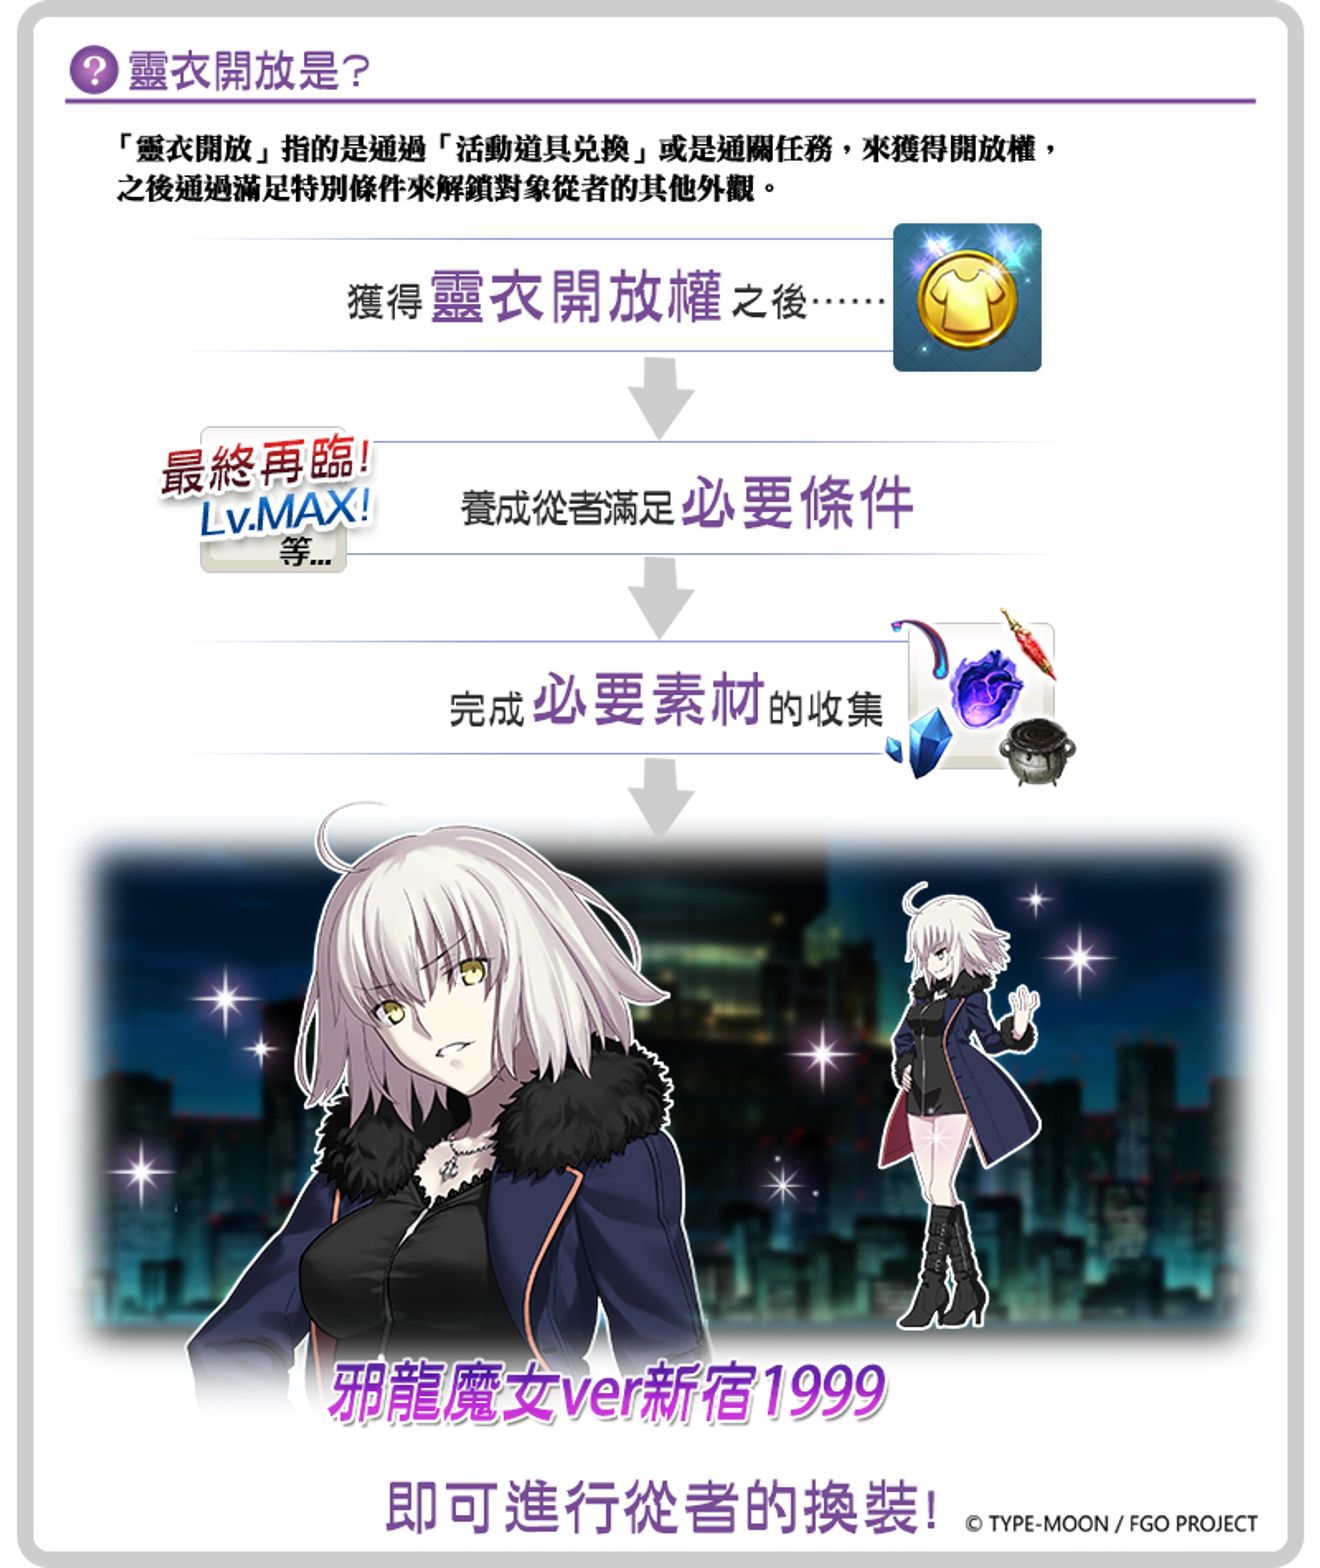 Fate Grand Order 繁中 From 吉米吉 Jimmy Taptap Fate Grand Order Community